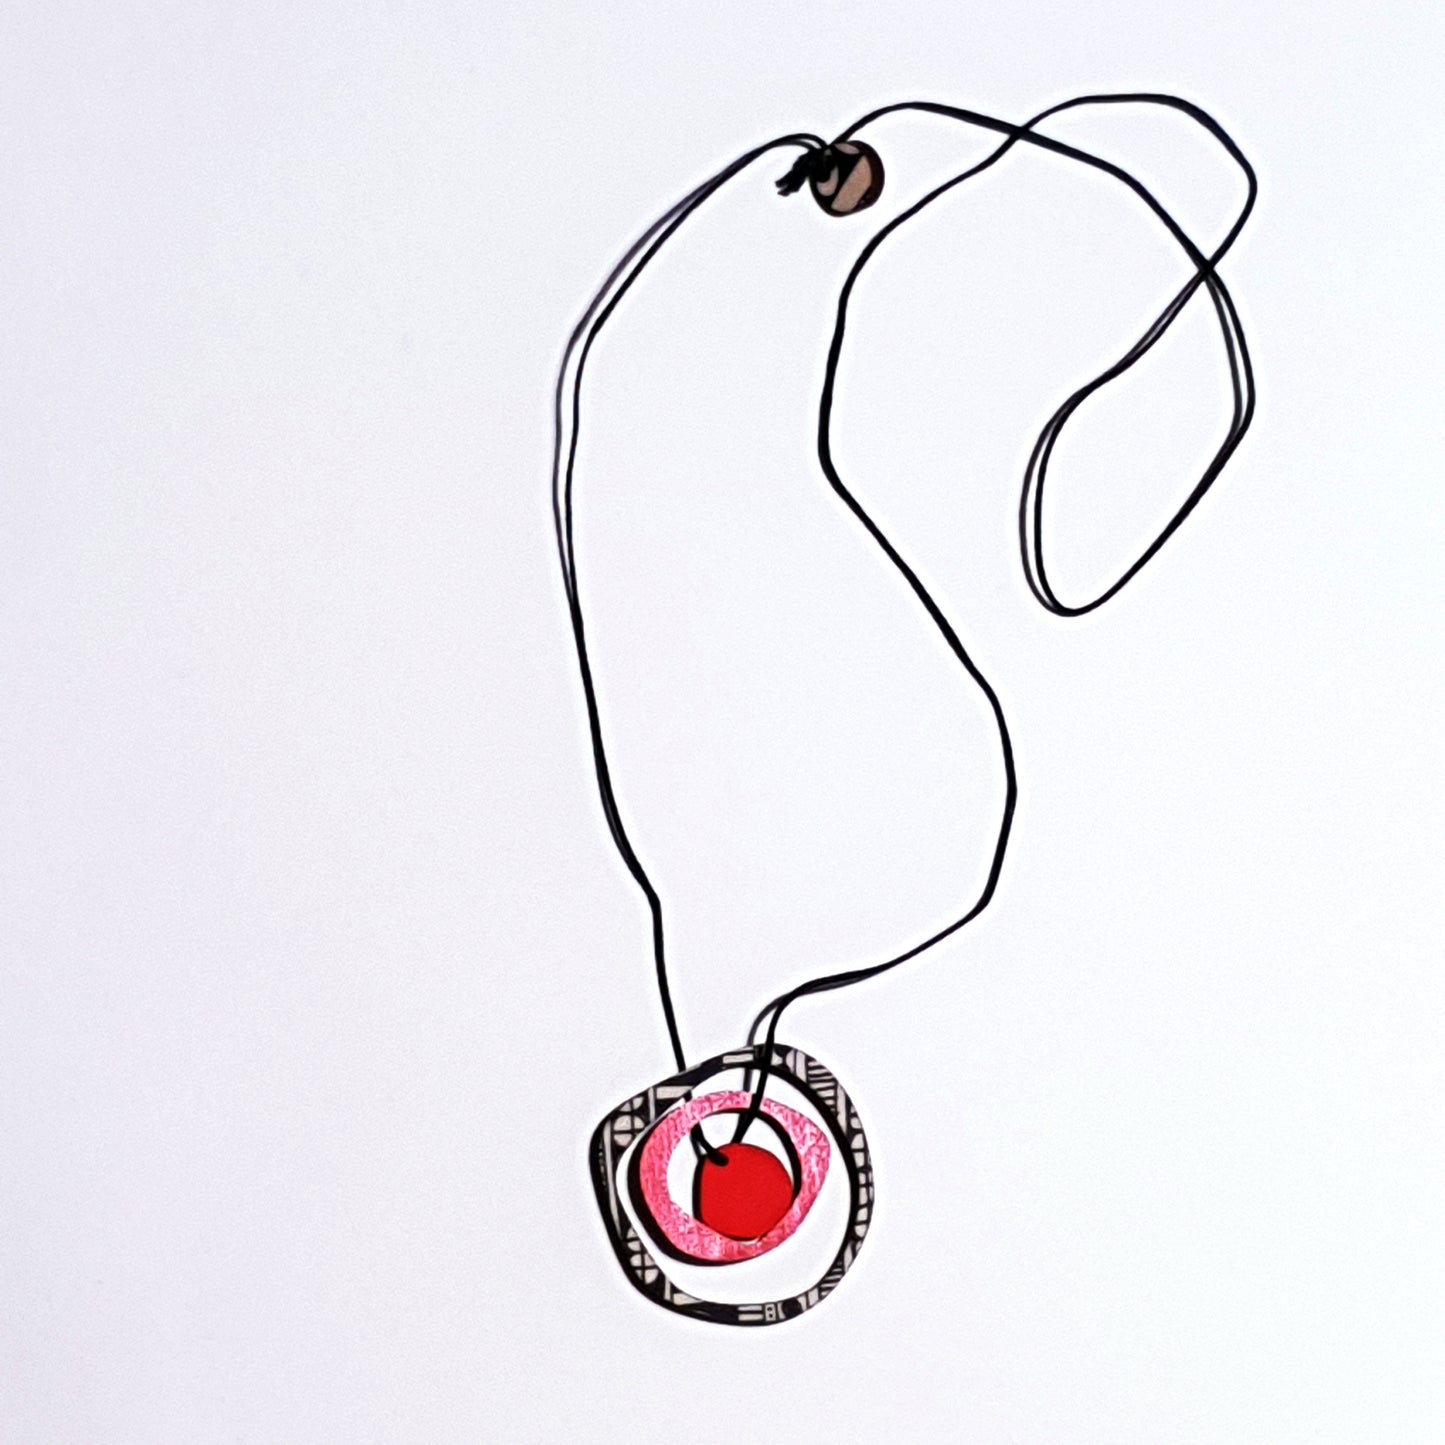 Doodle necklace by Scoops Design